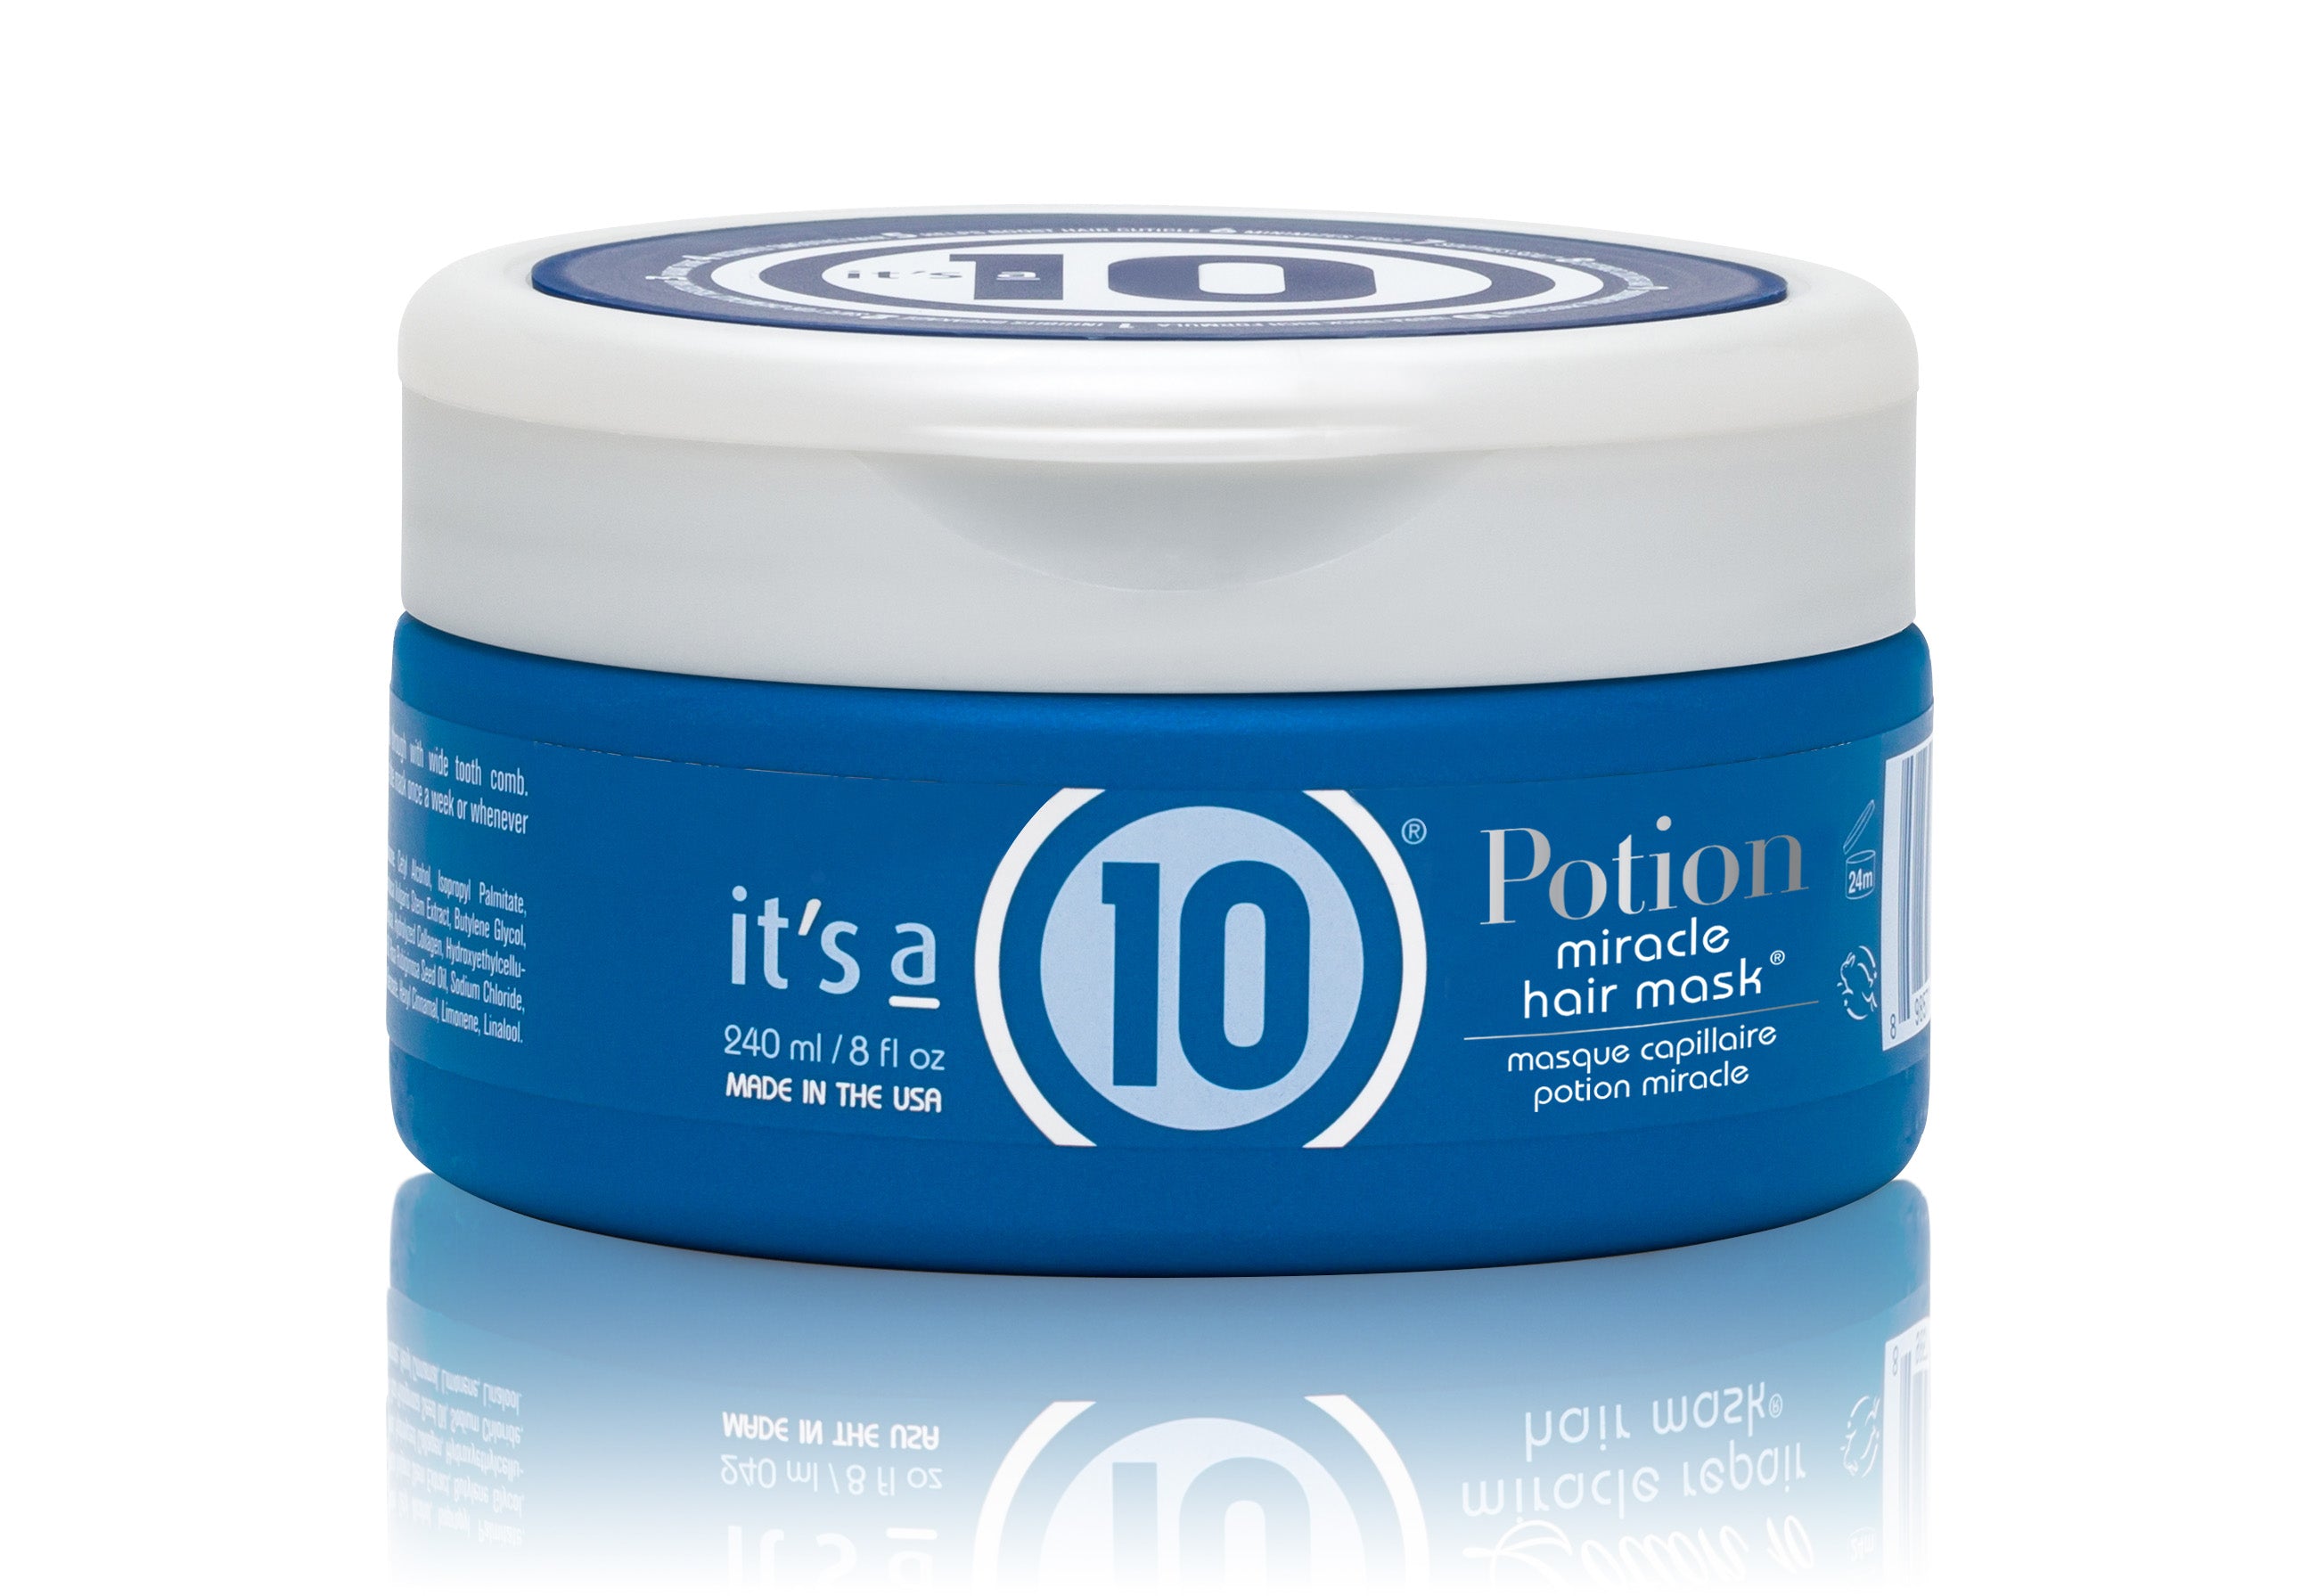 It’s a 10 Potion Miracle Hair Mask